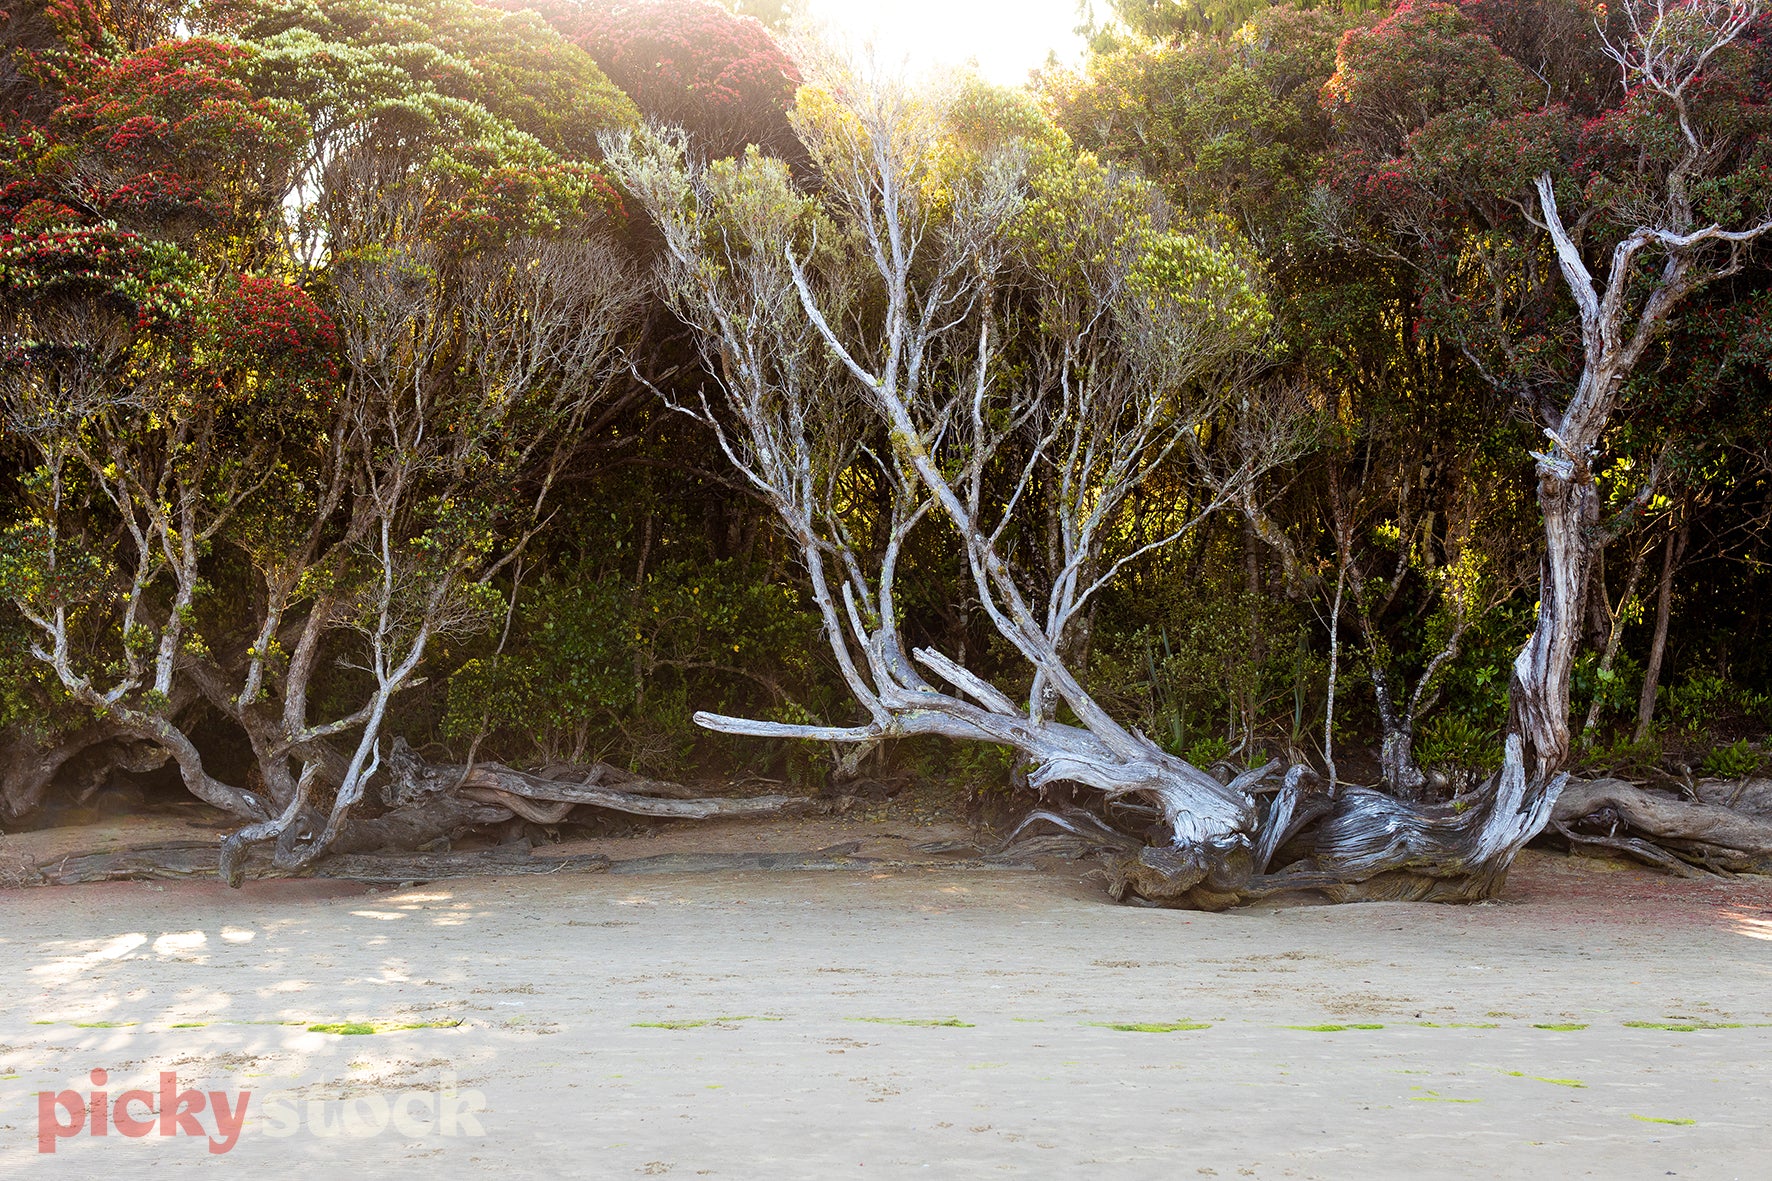 Large Pōhutukawa trees with big branches on the beach shore lline. Sand in the foreground. 